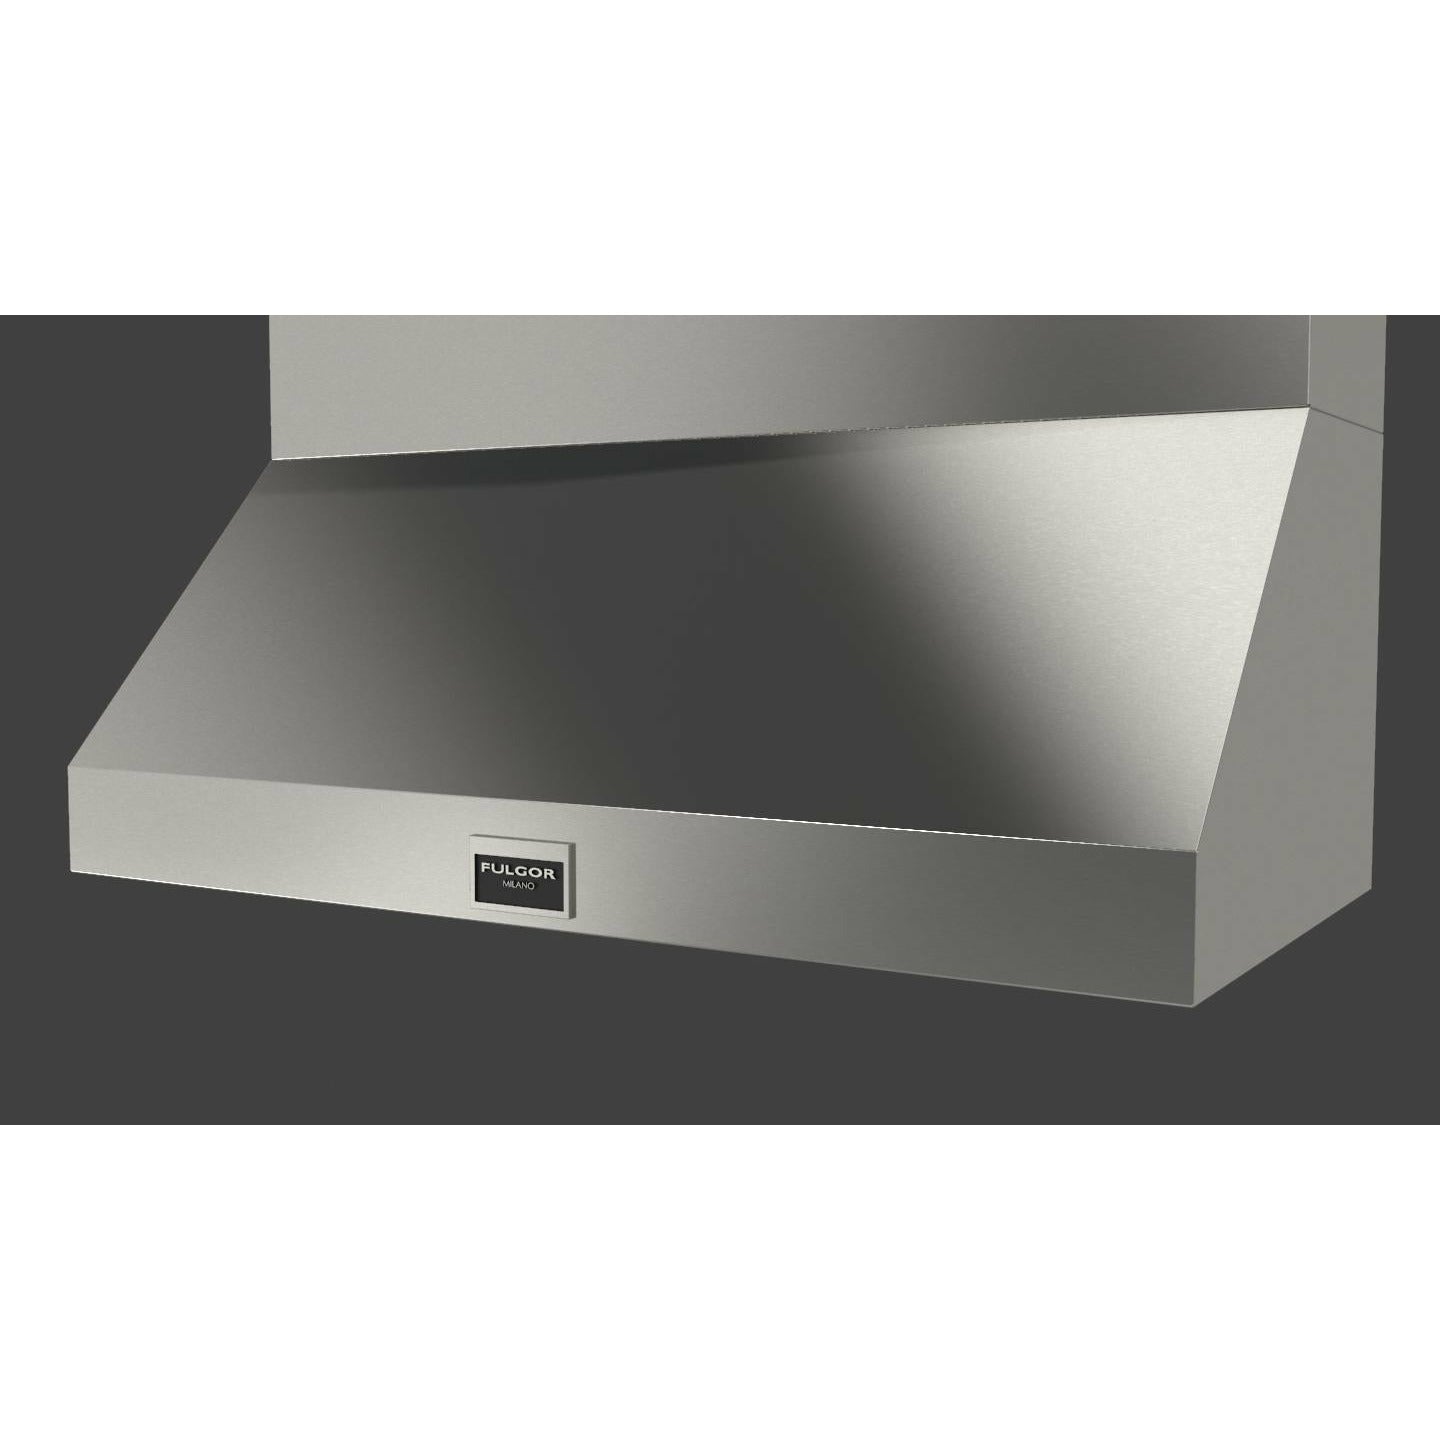 Fulgor Milano 48" Professional Wall Range Hood with Baffle Filters, Stainless Steel - F6PH48DS1 Hoods F6PH48DS1 Luxury Appliances Direct